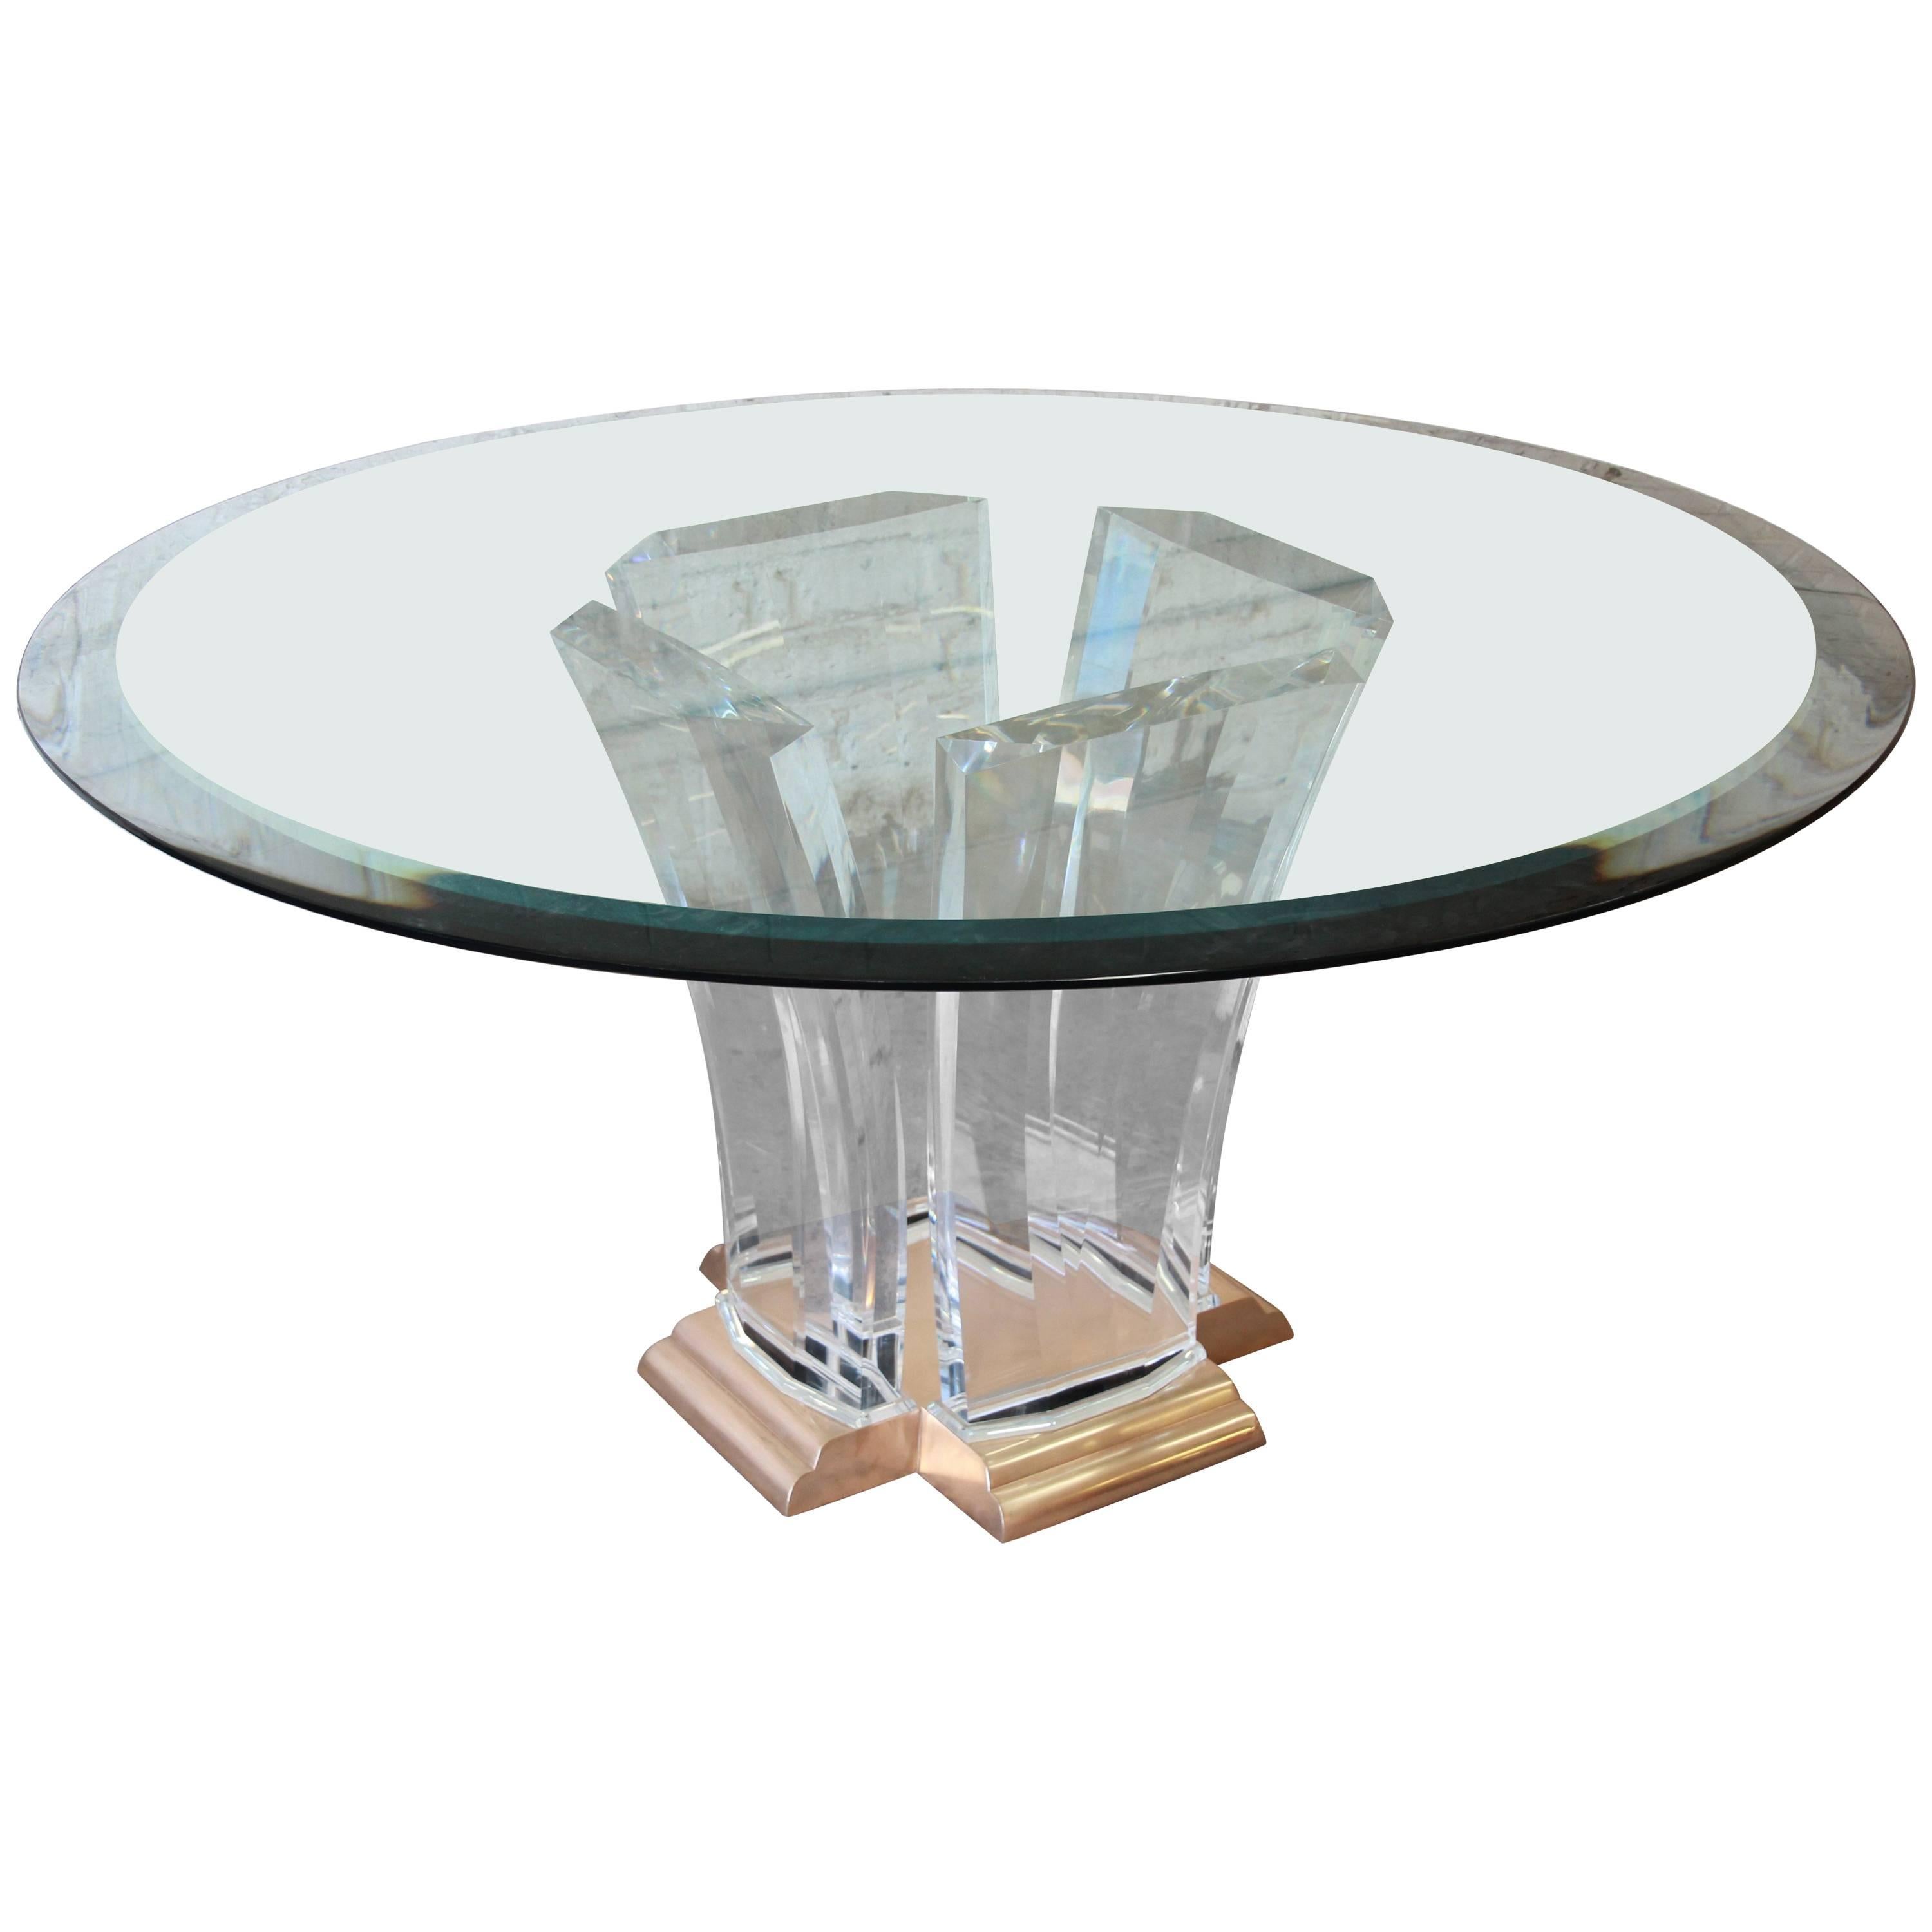 Jeffrey Bigelow Lucite, Brass, and Glass Dining or Center Table, 1984